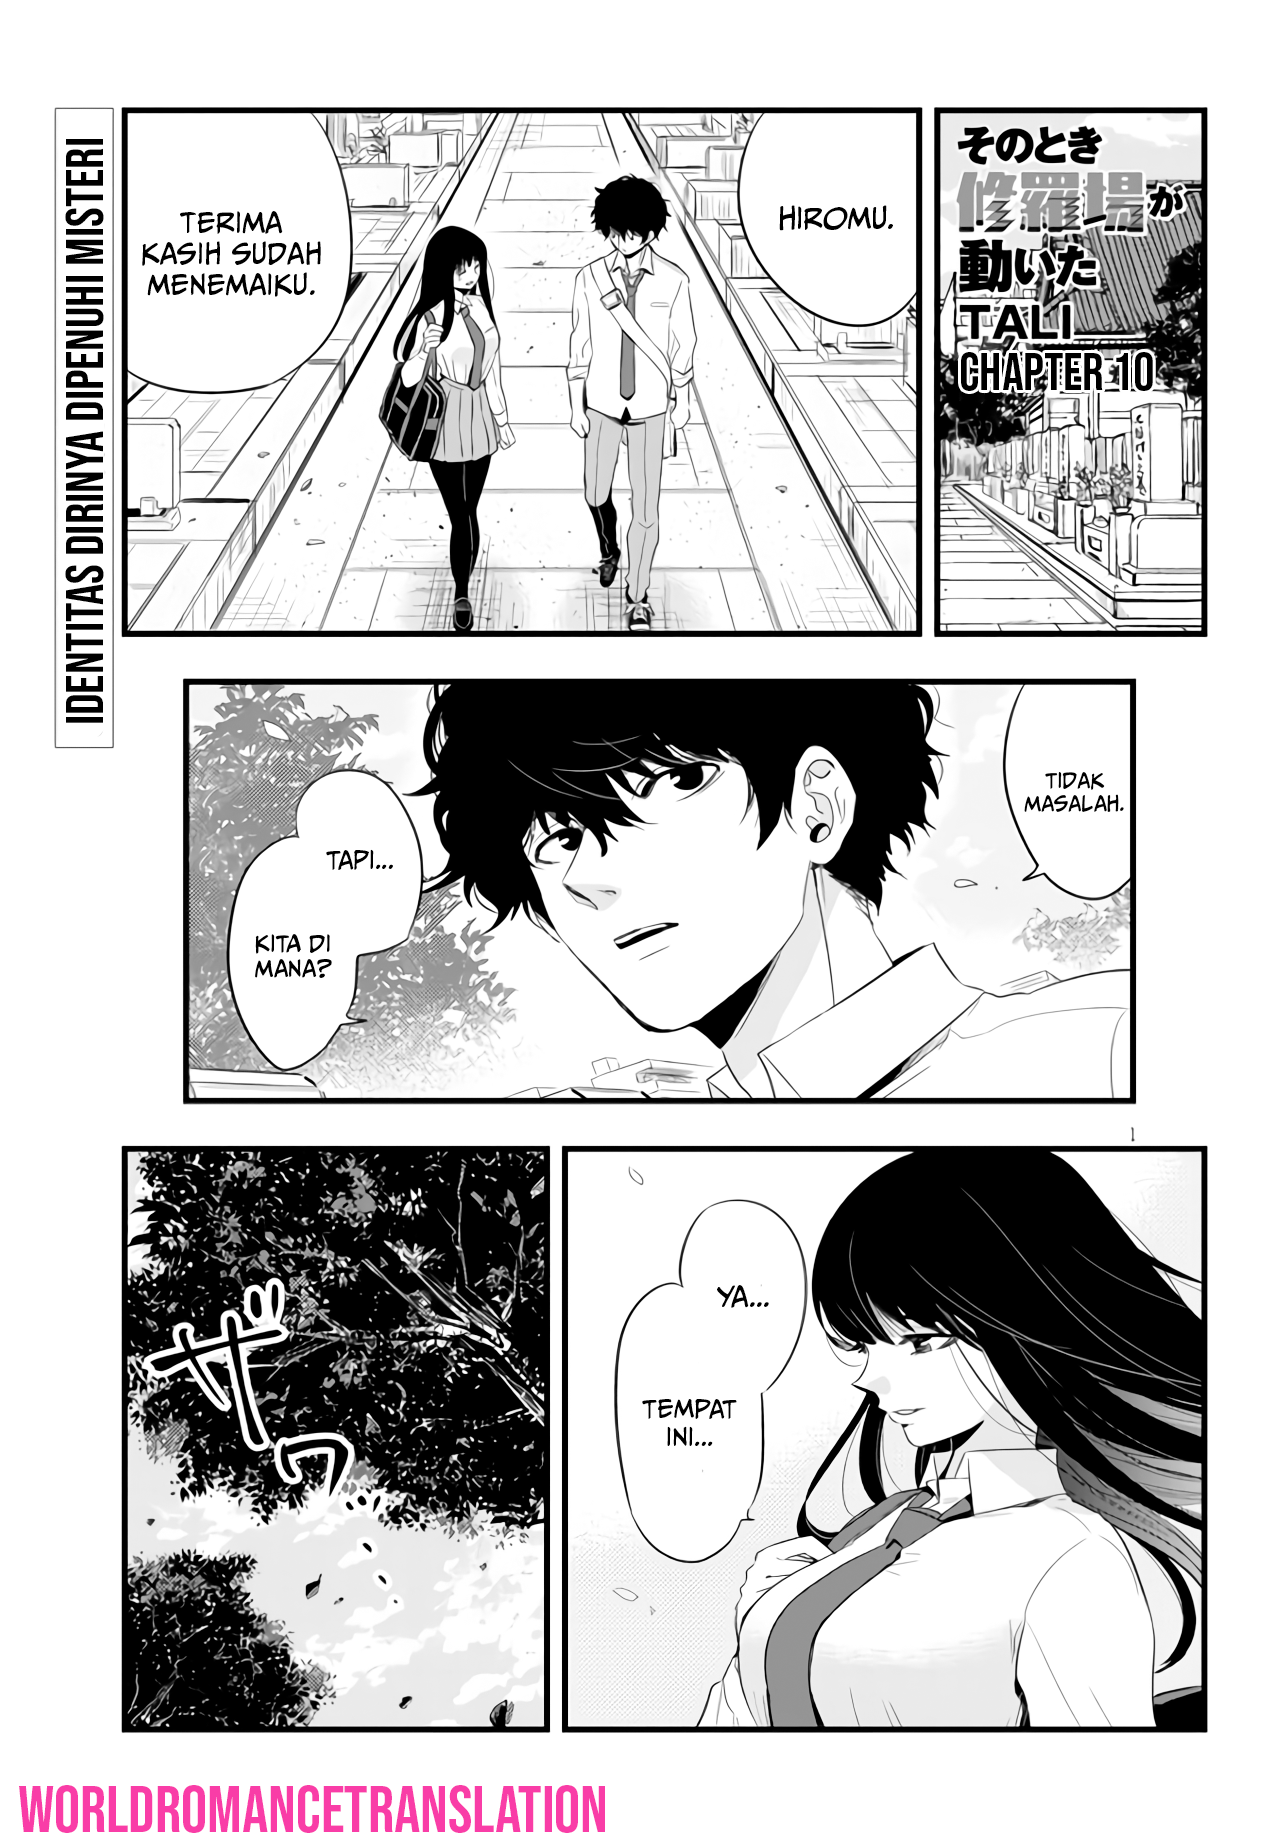 At That Time, The Battle Began (Yandere X Yandere) Chapter 10 - 123